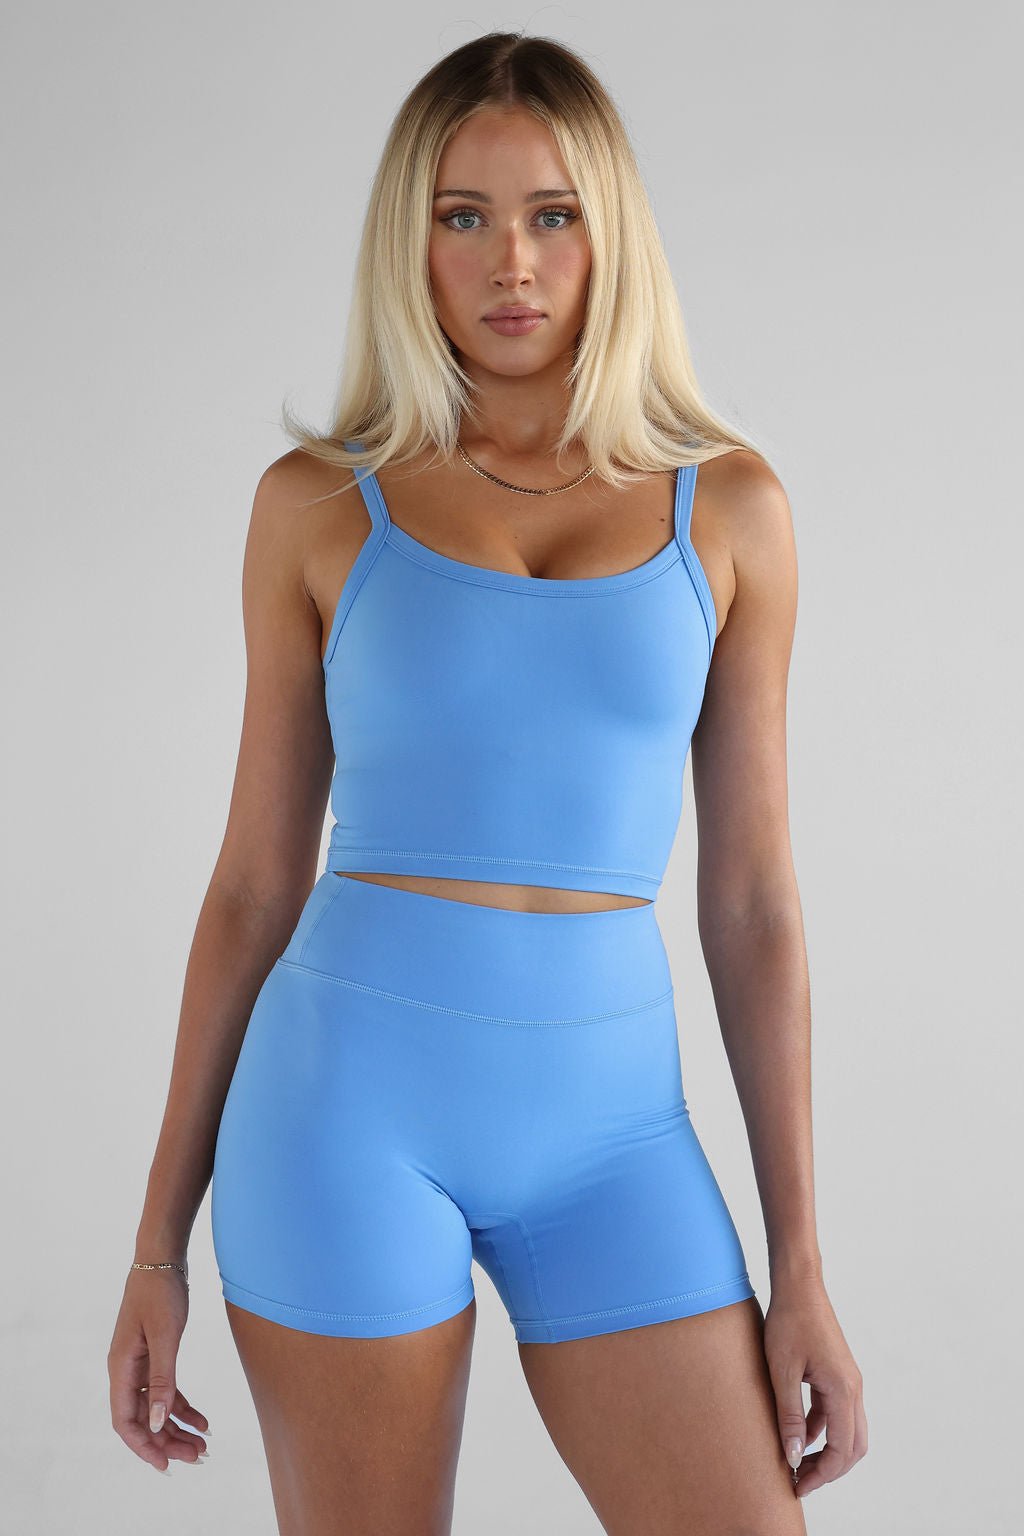 SIGNATURE Tank - Arctic Blue SHIPPING FROM 12/02 - LEELO ACTIVE